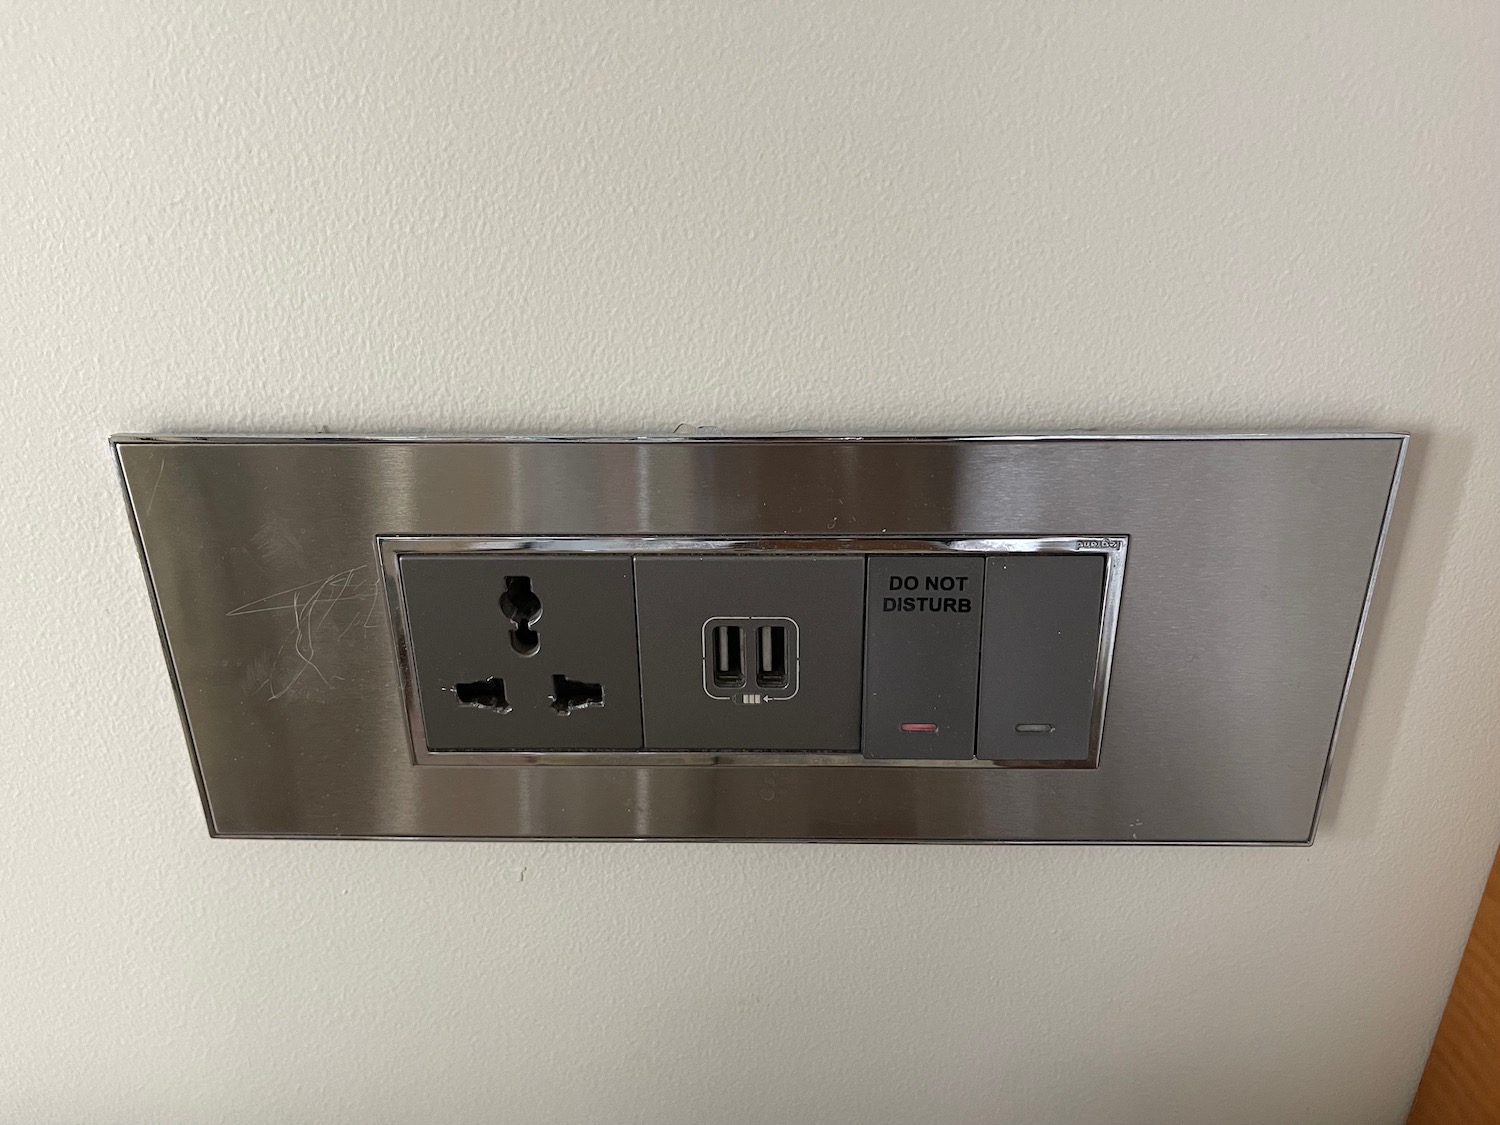 a silver rectangular outlet with a black and white button